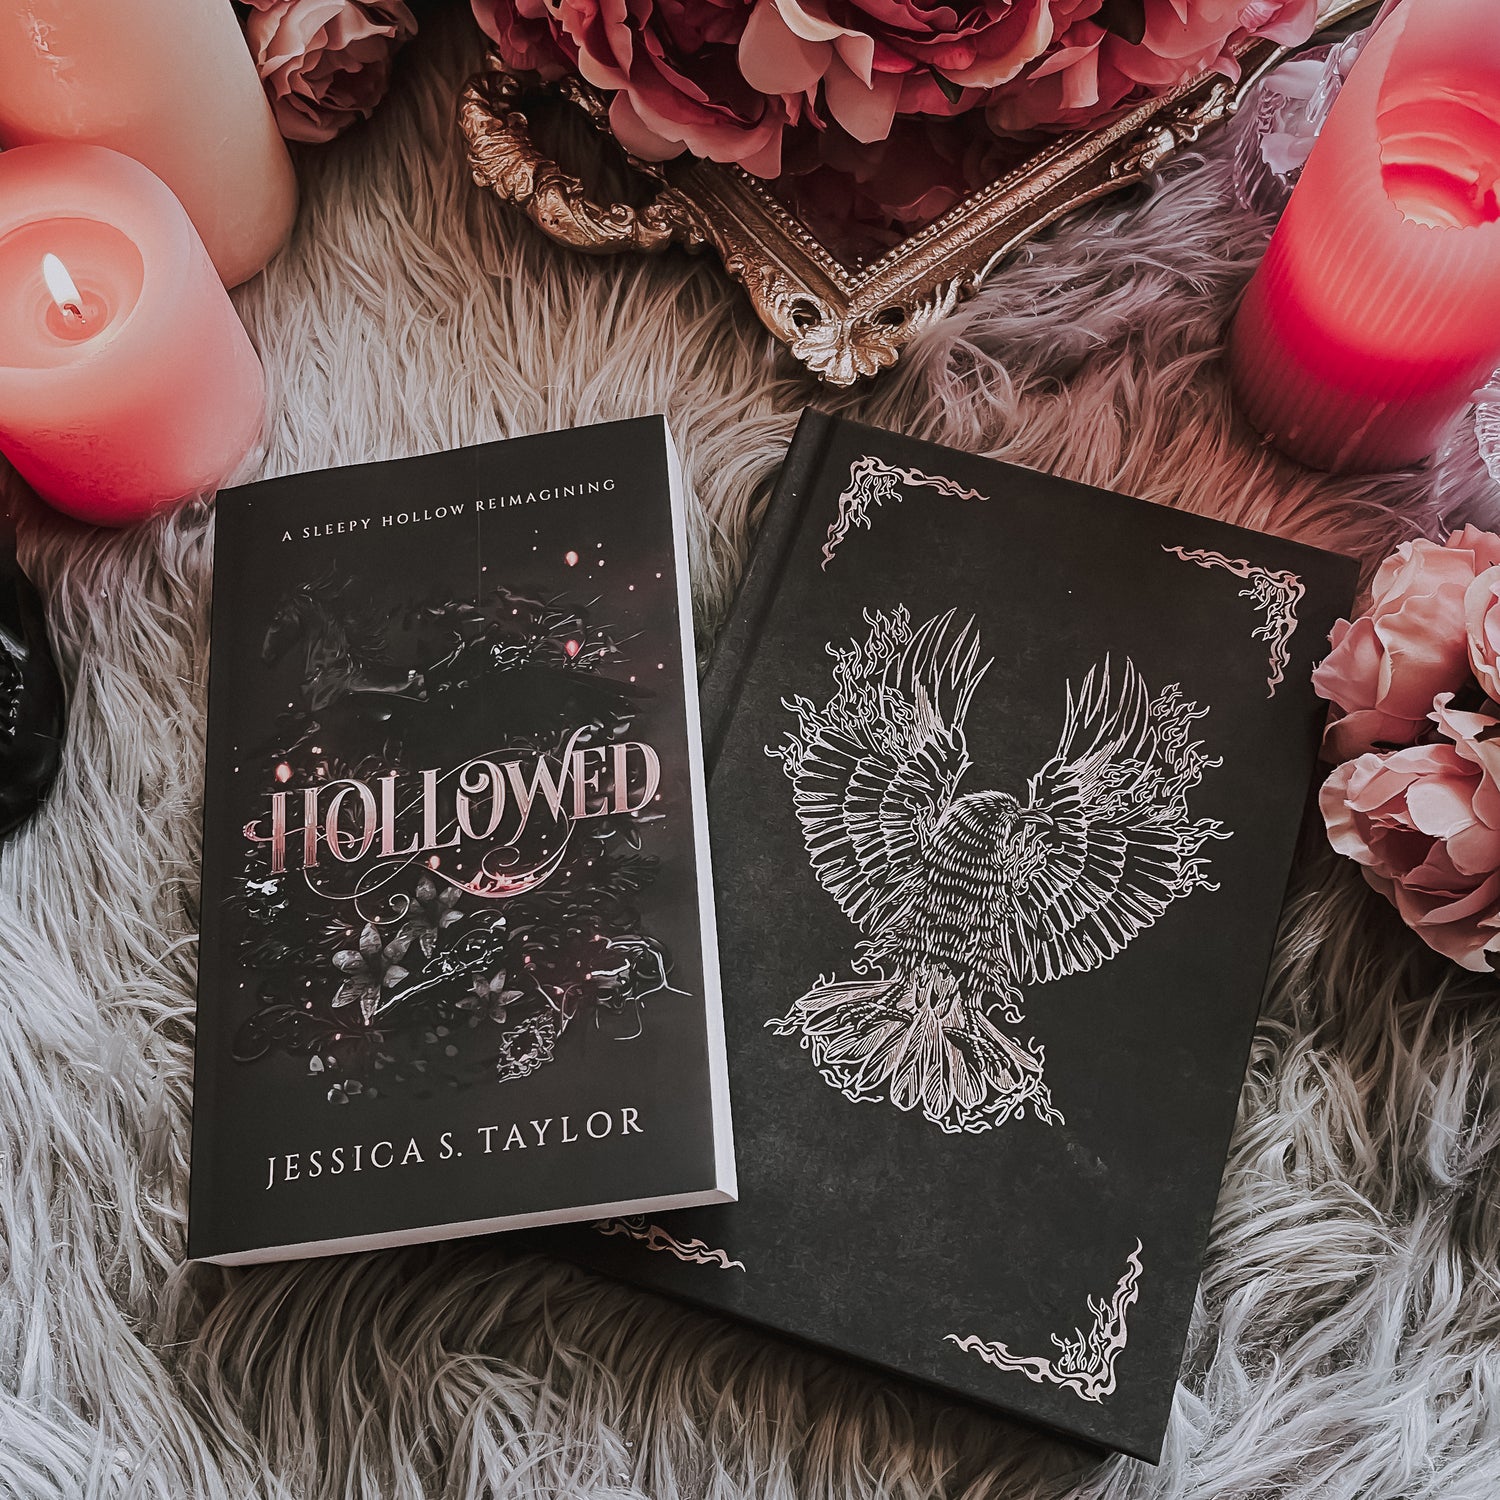 Image of a paperback resting at an angle atop a hardback. The paperback is titled HOLLOWED and features a collection of items behind the swirling fire styled typography. The hardback is a black hardback with an illustrated firebird in the center and decorative corners stylized in flames. The background is a gray fur rug, and pink flowers and candles surround the border.